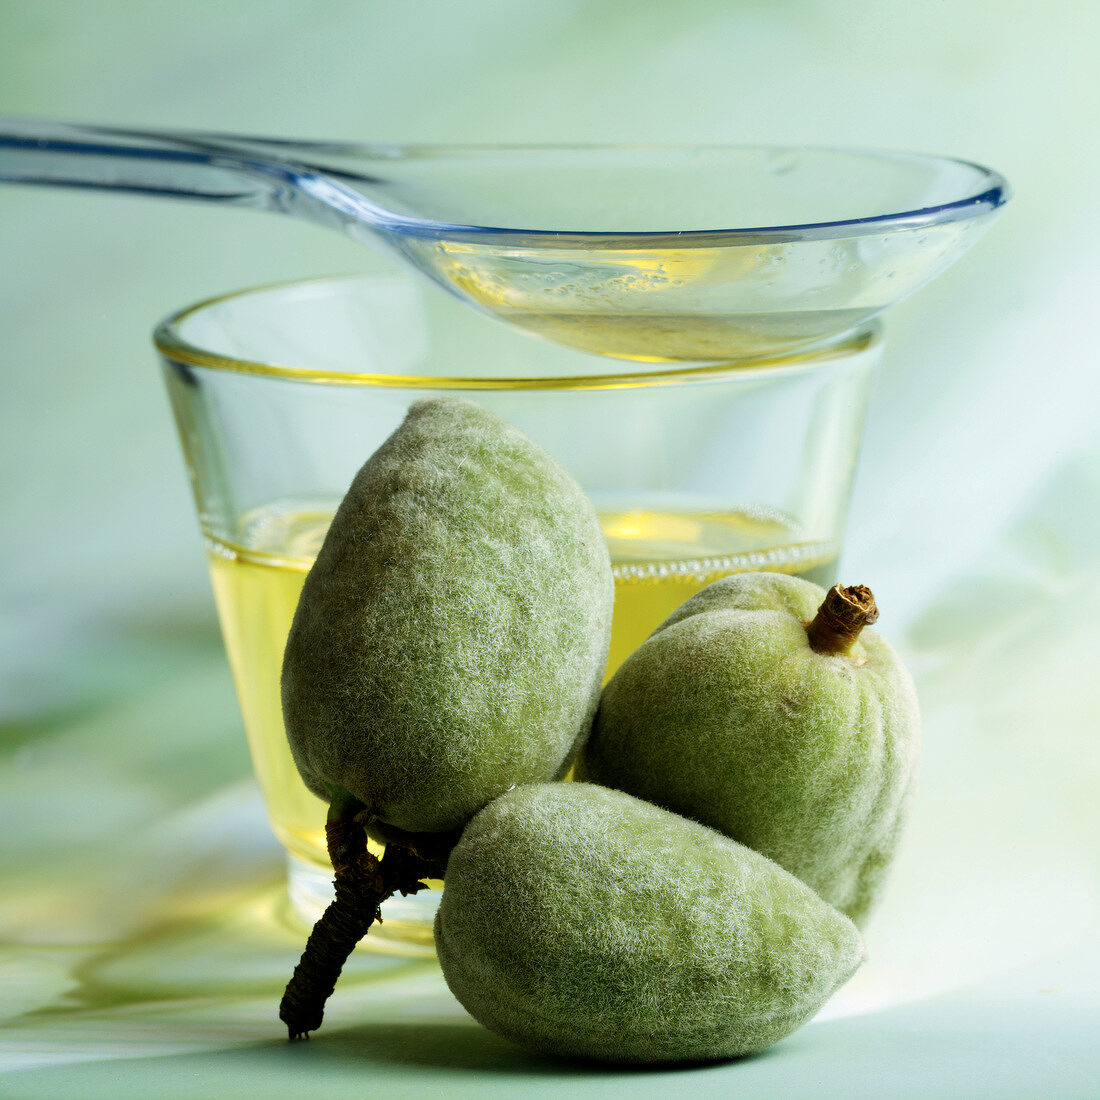 Fresh almonds and sweet almond oil